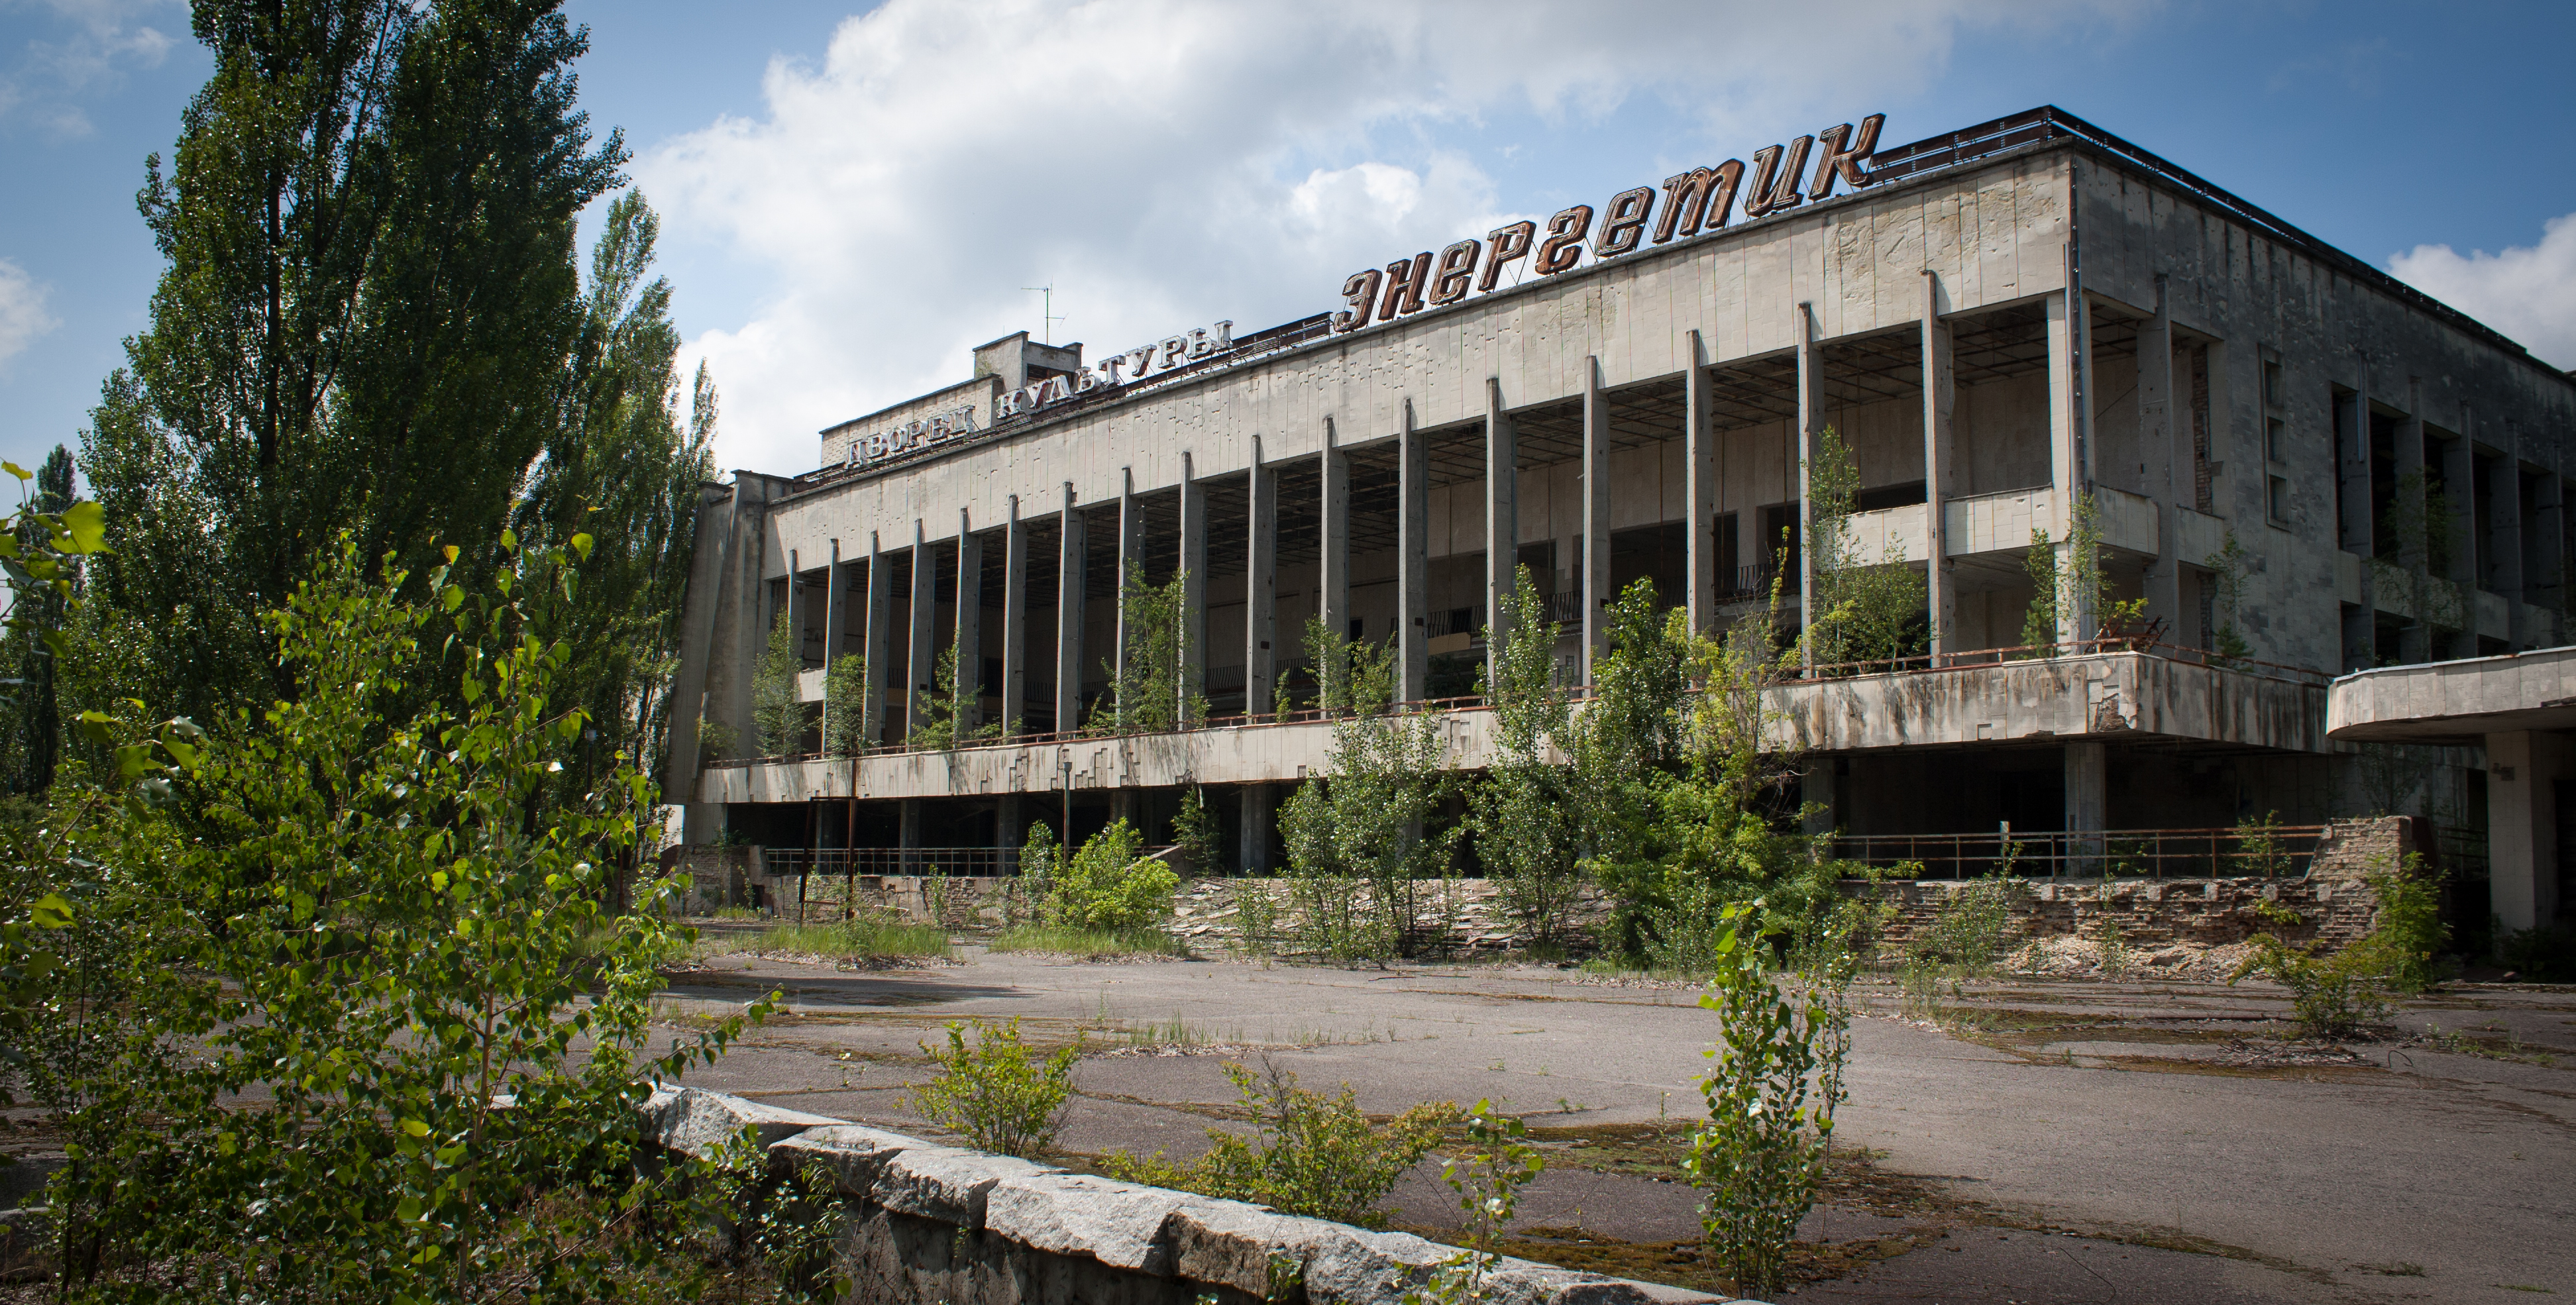 Touring Chernobyl and Pripyat (inside buildings)